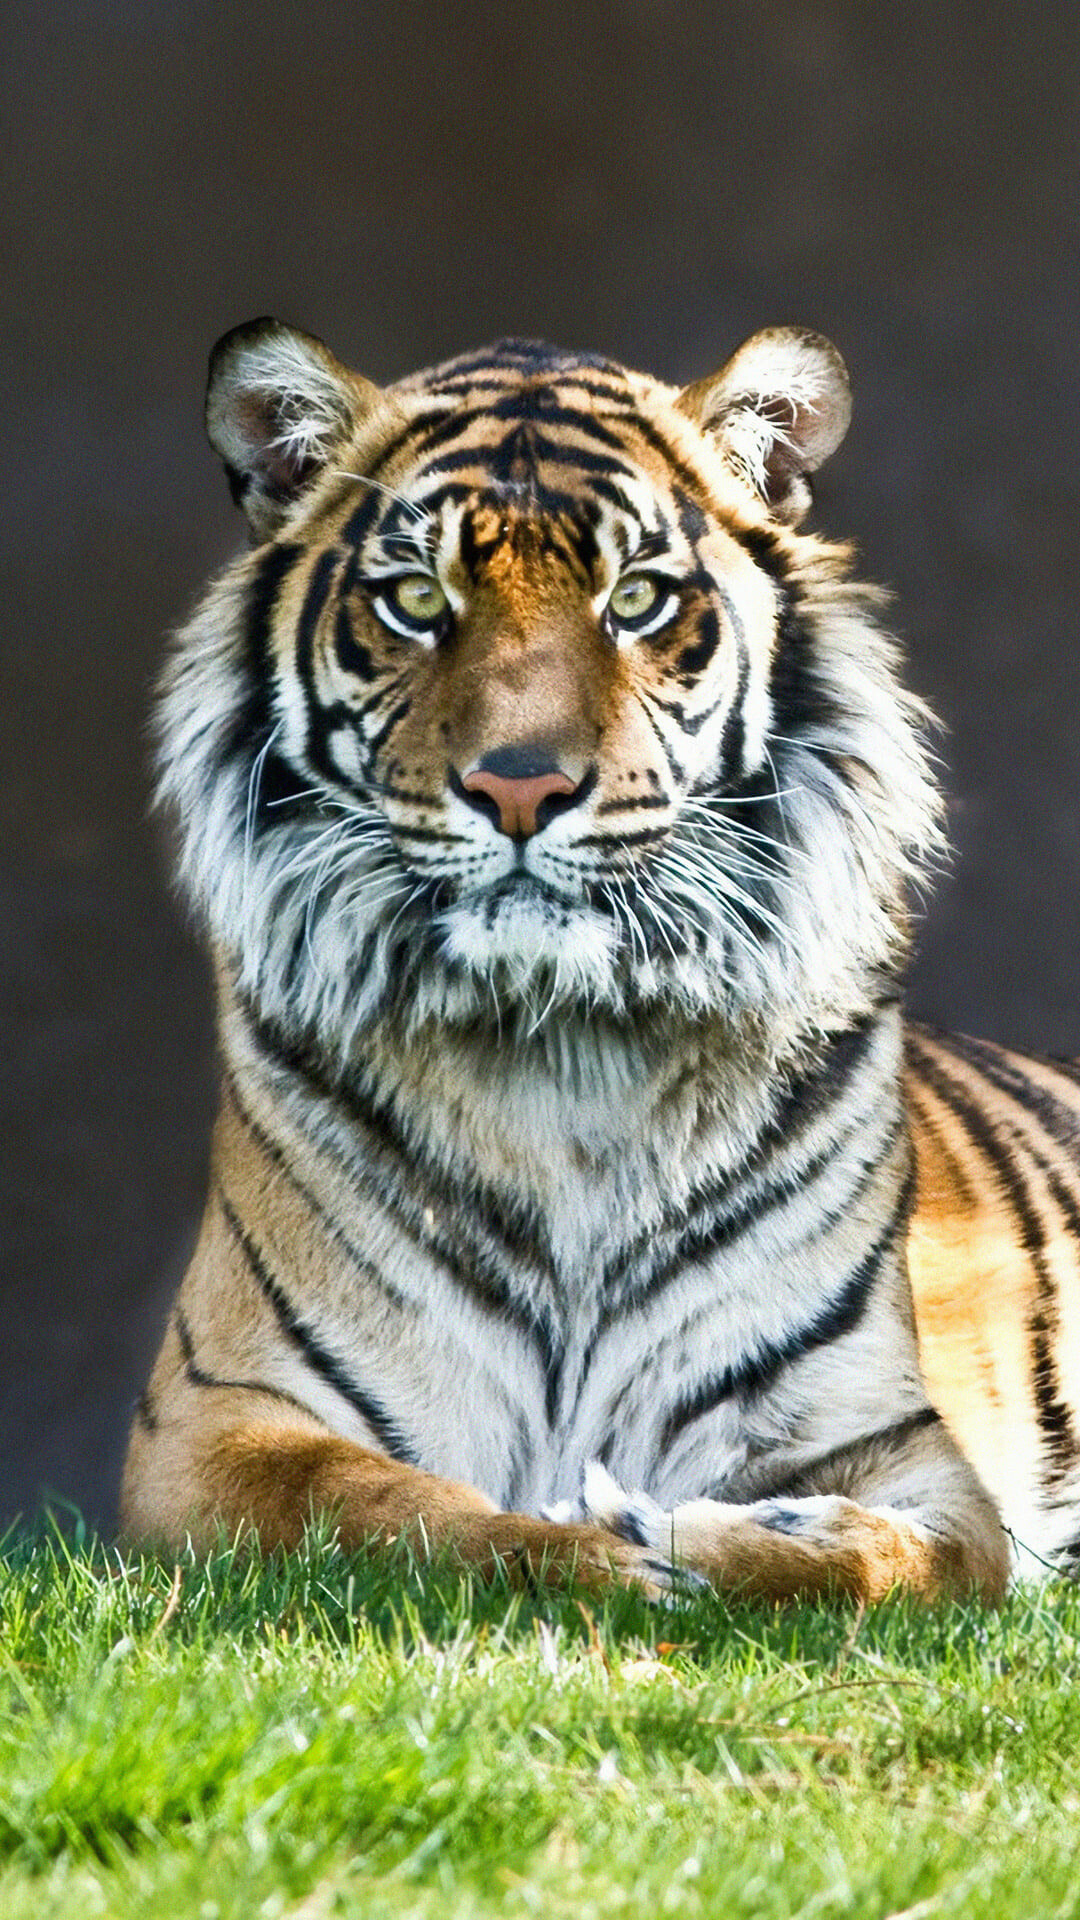 Tiger wallpapers, Stunning backgrounds, High-quality images, Majestic creatures, 1080x1920 Full HD Phone